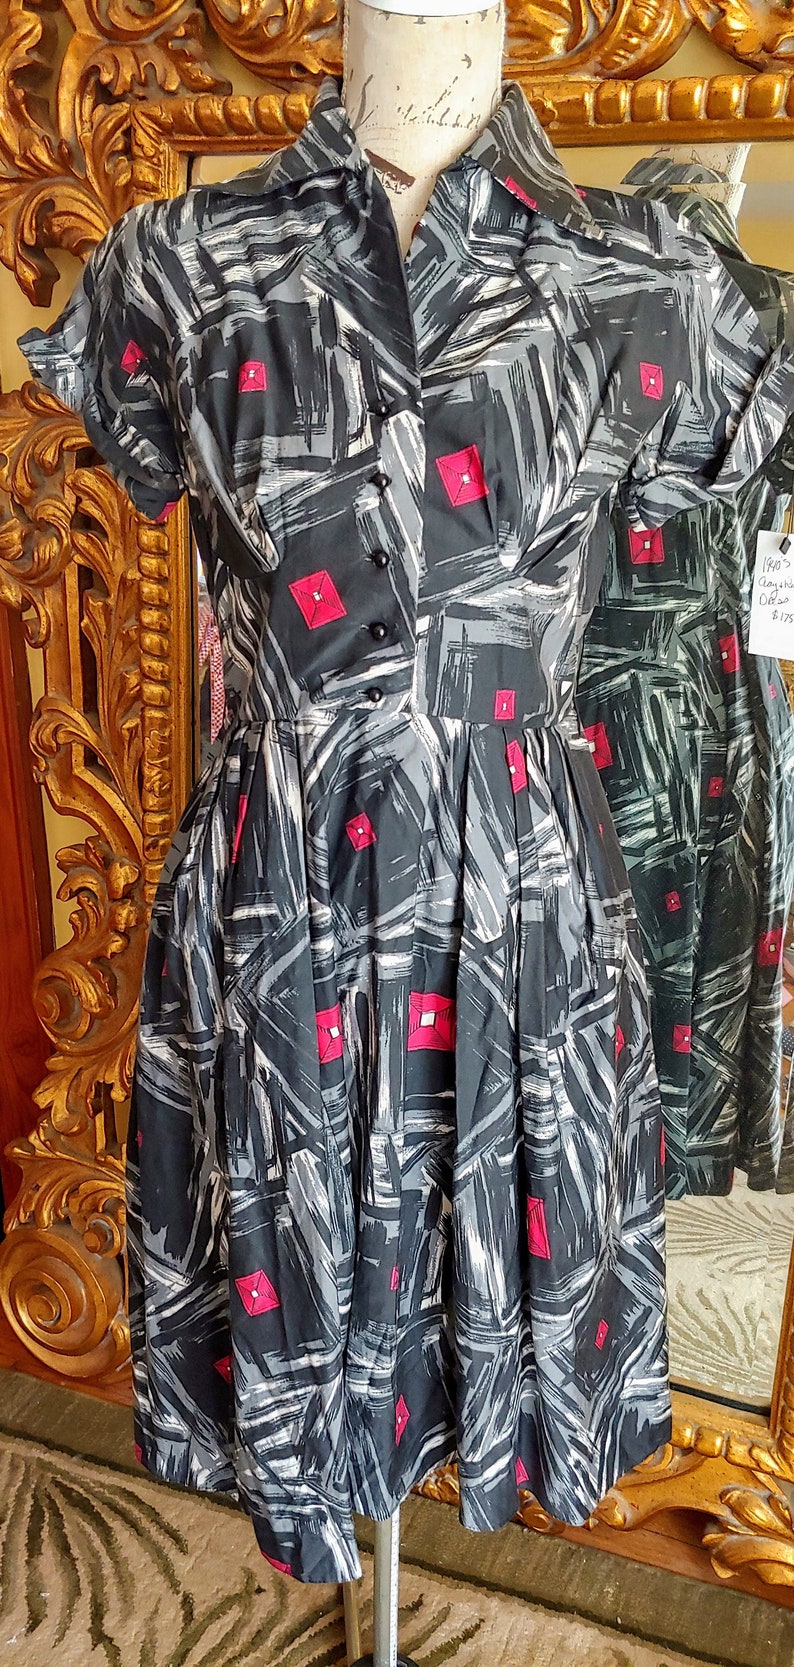 Vintage 1940's Black and Gray Abstract Print Cotton Dress image 2